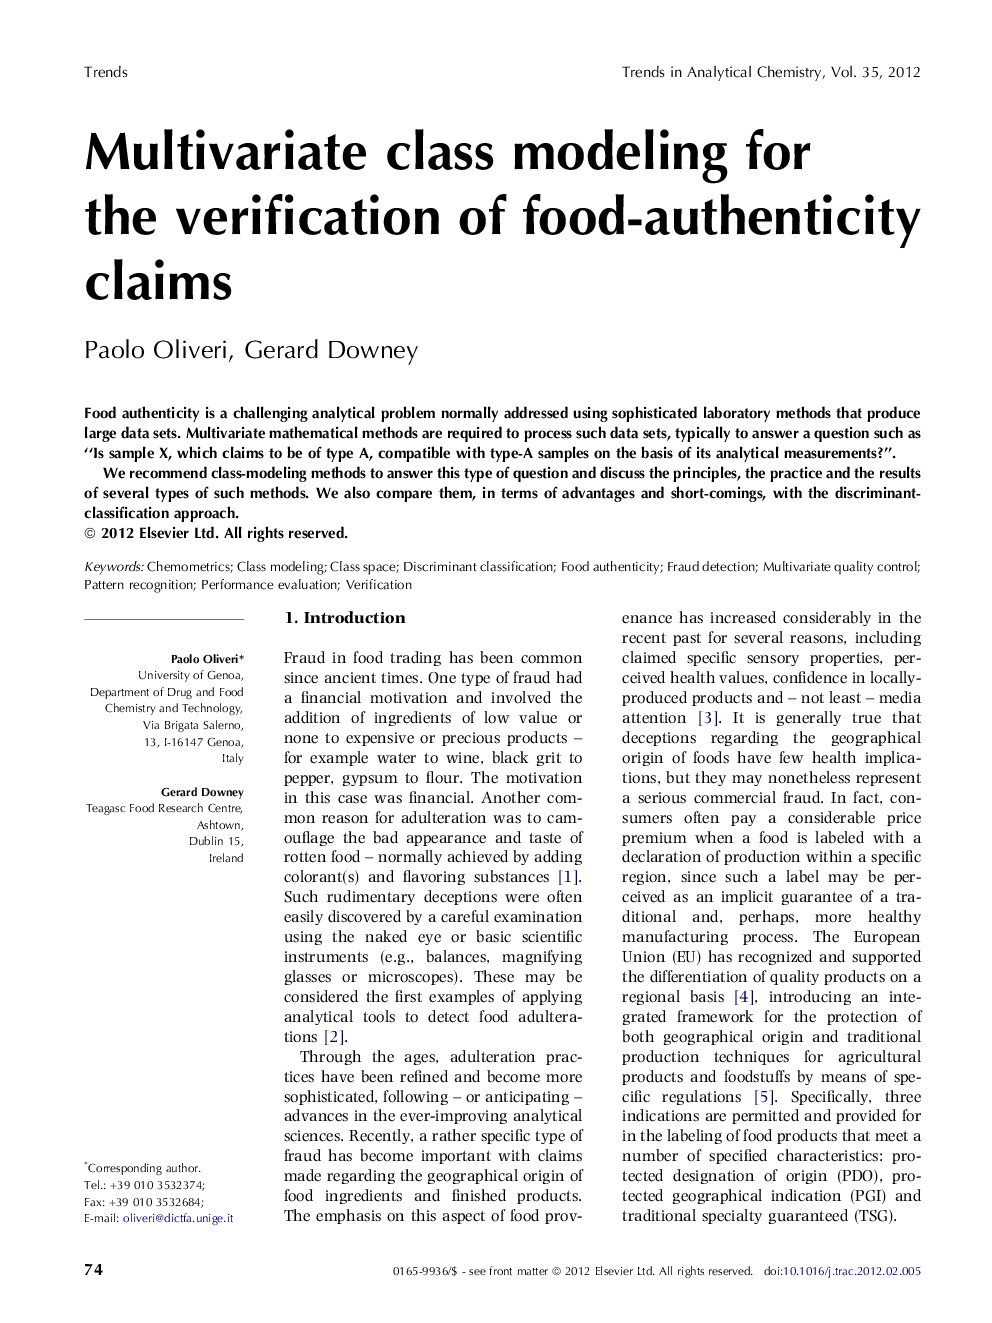 Multivariate class modeling for the verification of food-authenticity claims